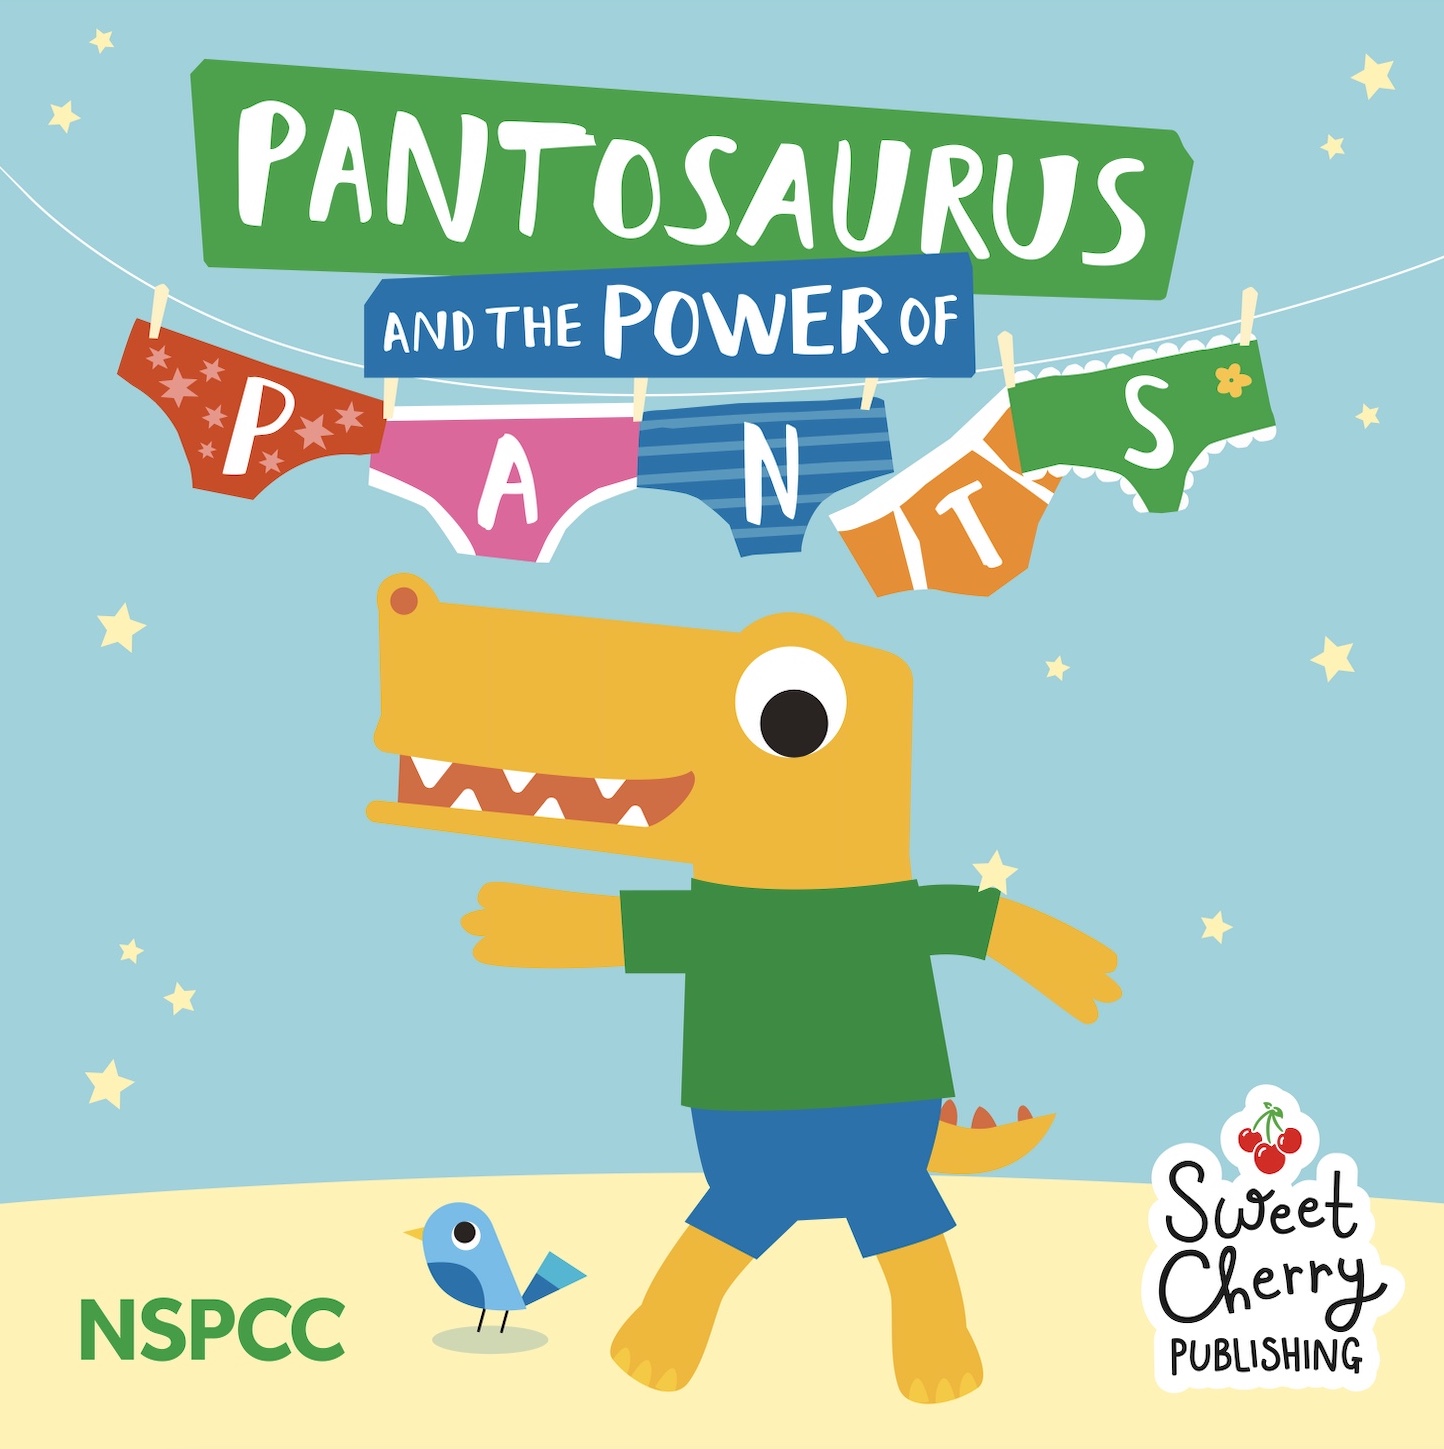 Sweet Cherry Publishing secures publishing deal for the NSPCC’s Pantosaurus